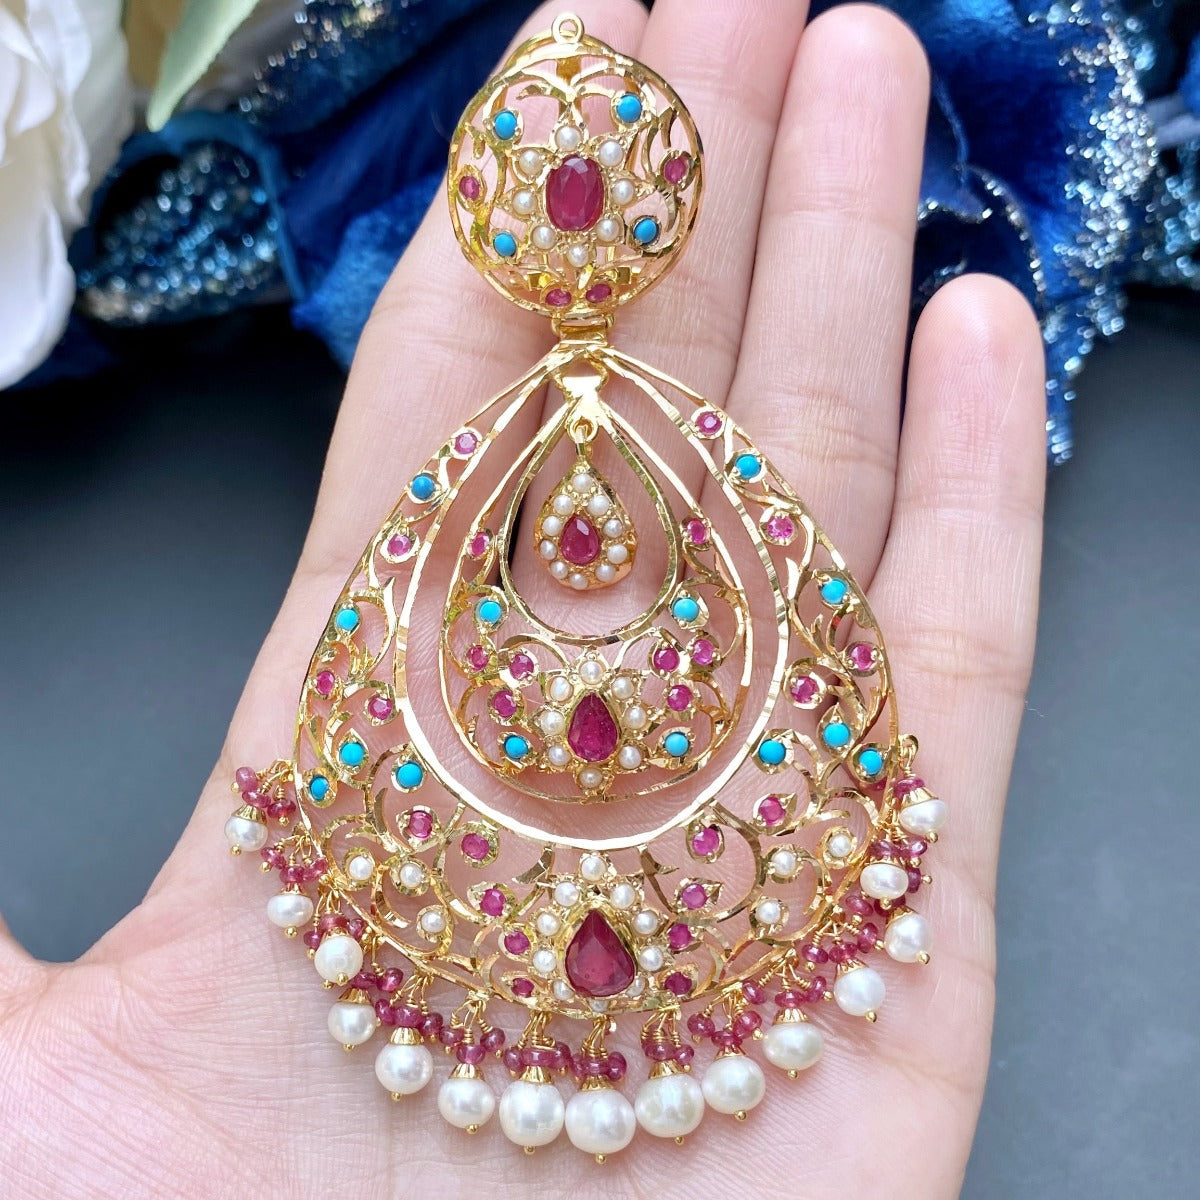 Statement Edwardian Styled Bollywood Earrings | 22k Gold  Indian Jewelry